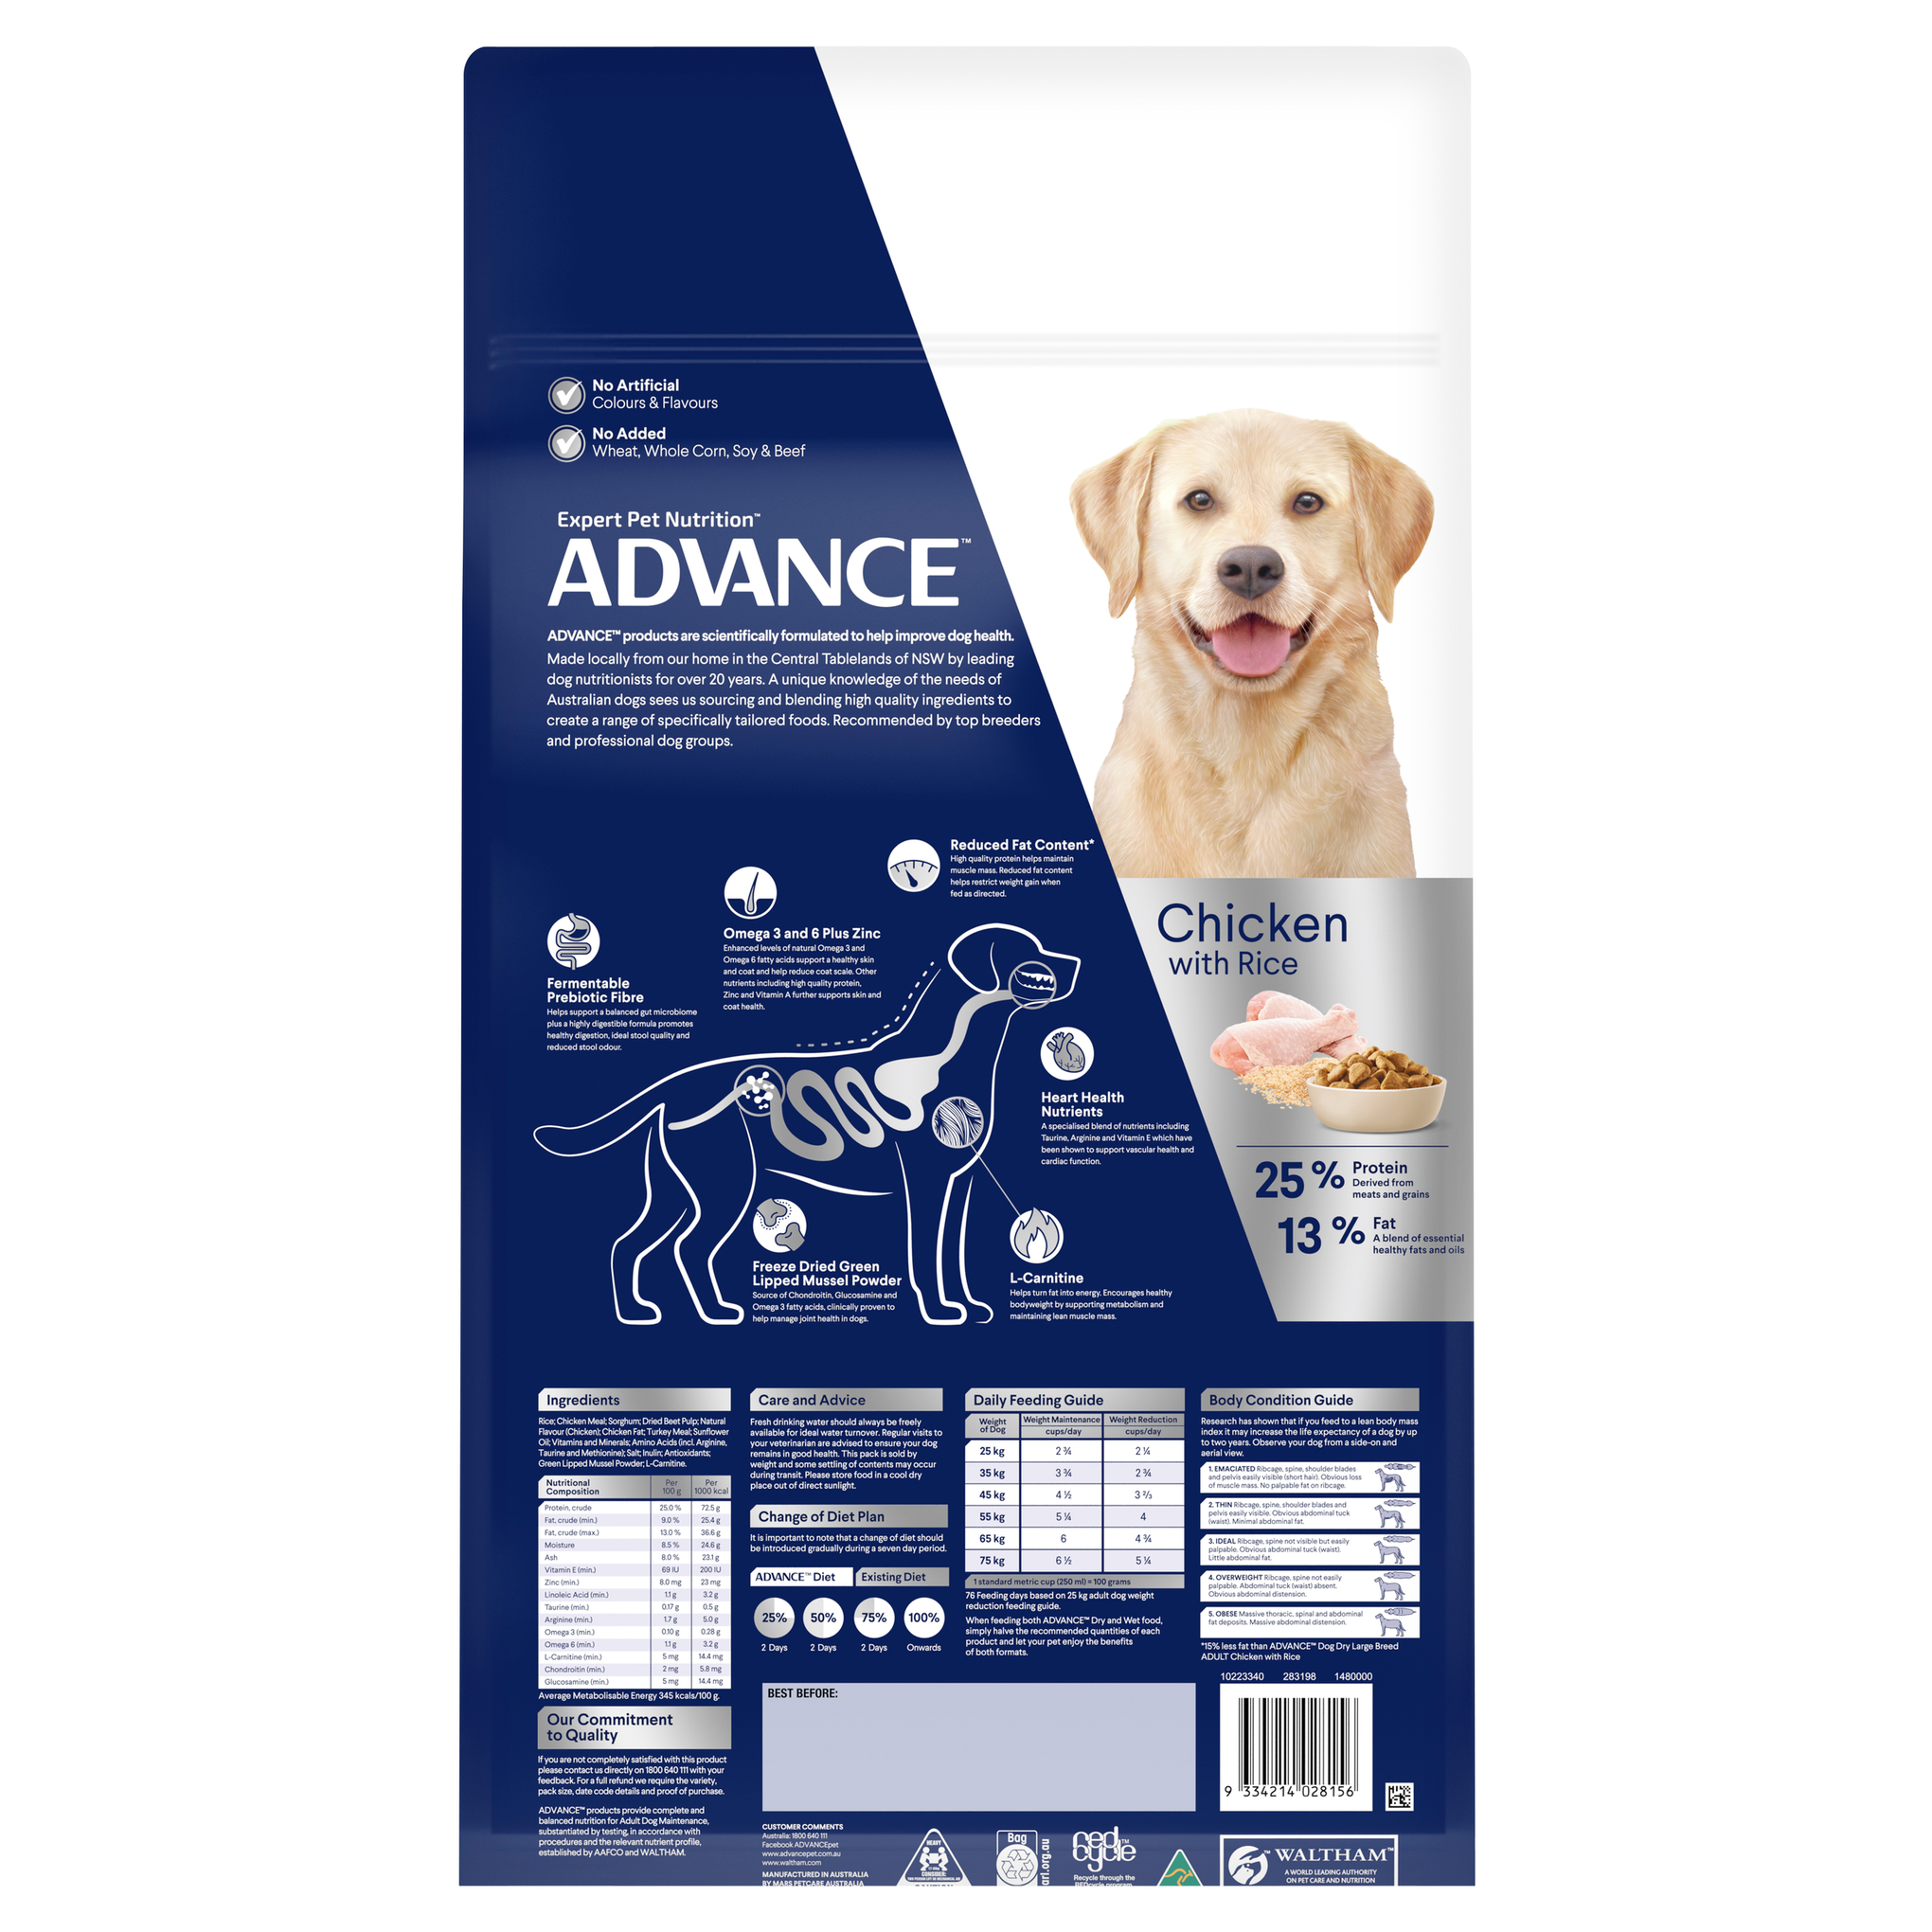 Advance Chicken and Rice Healthy Weight Large Breed Adult Dry Dog Food 17kg